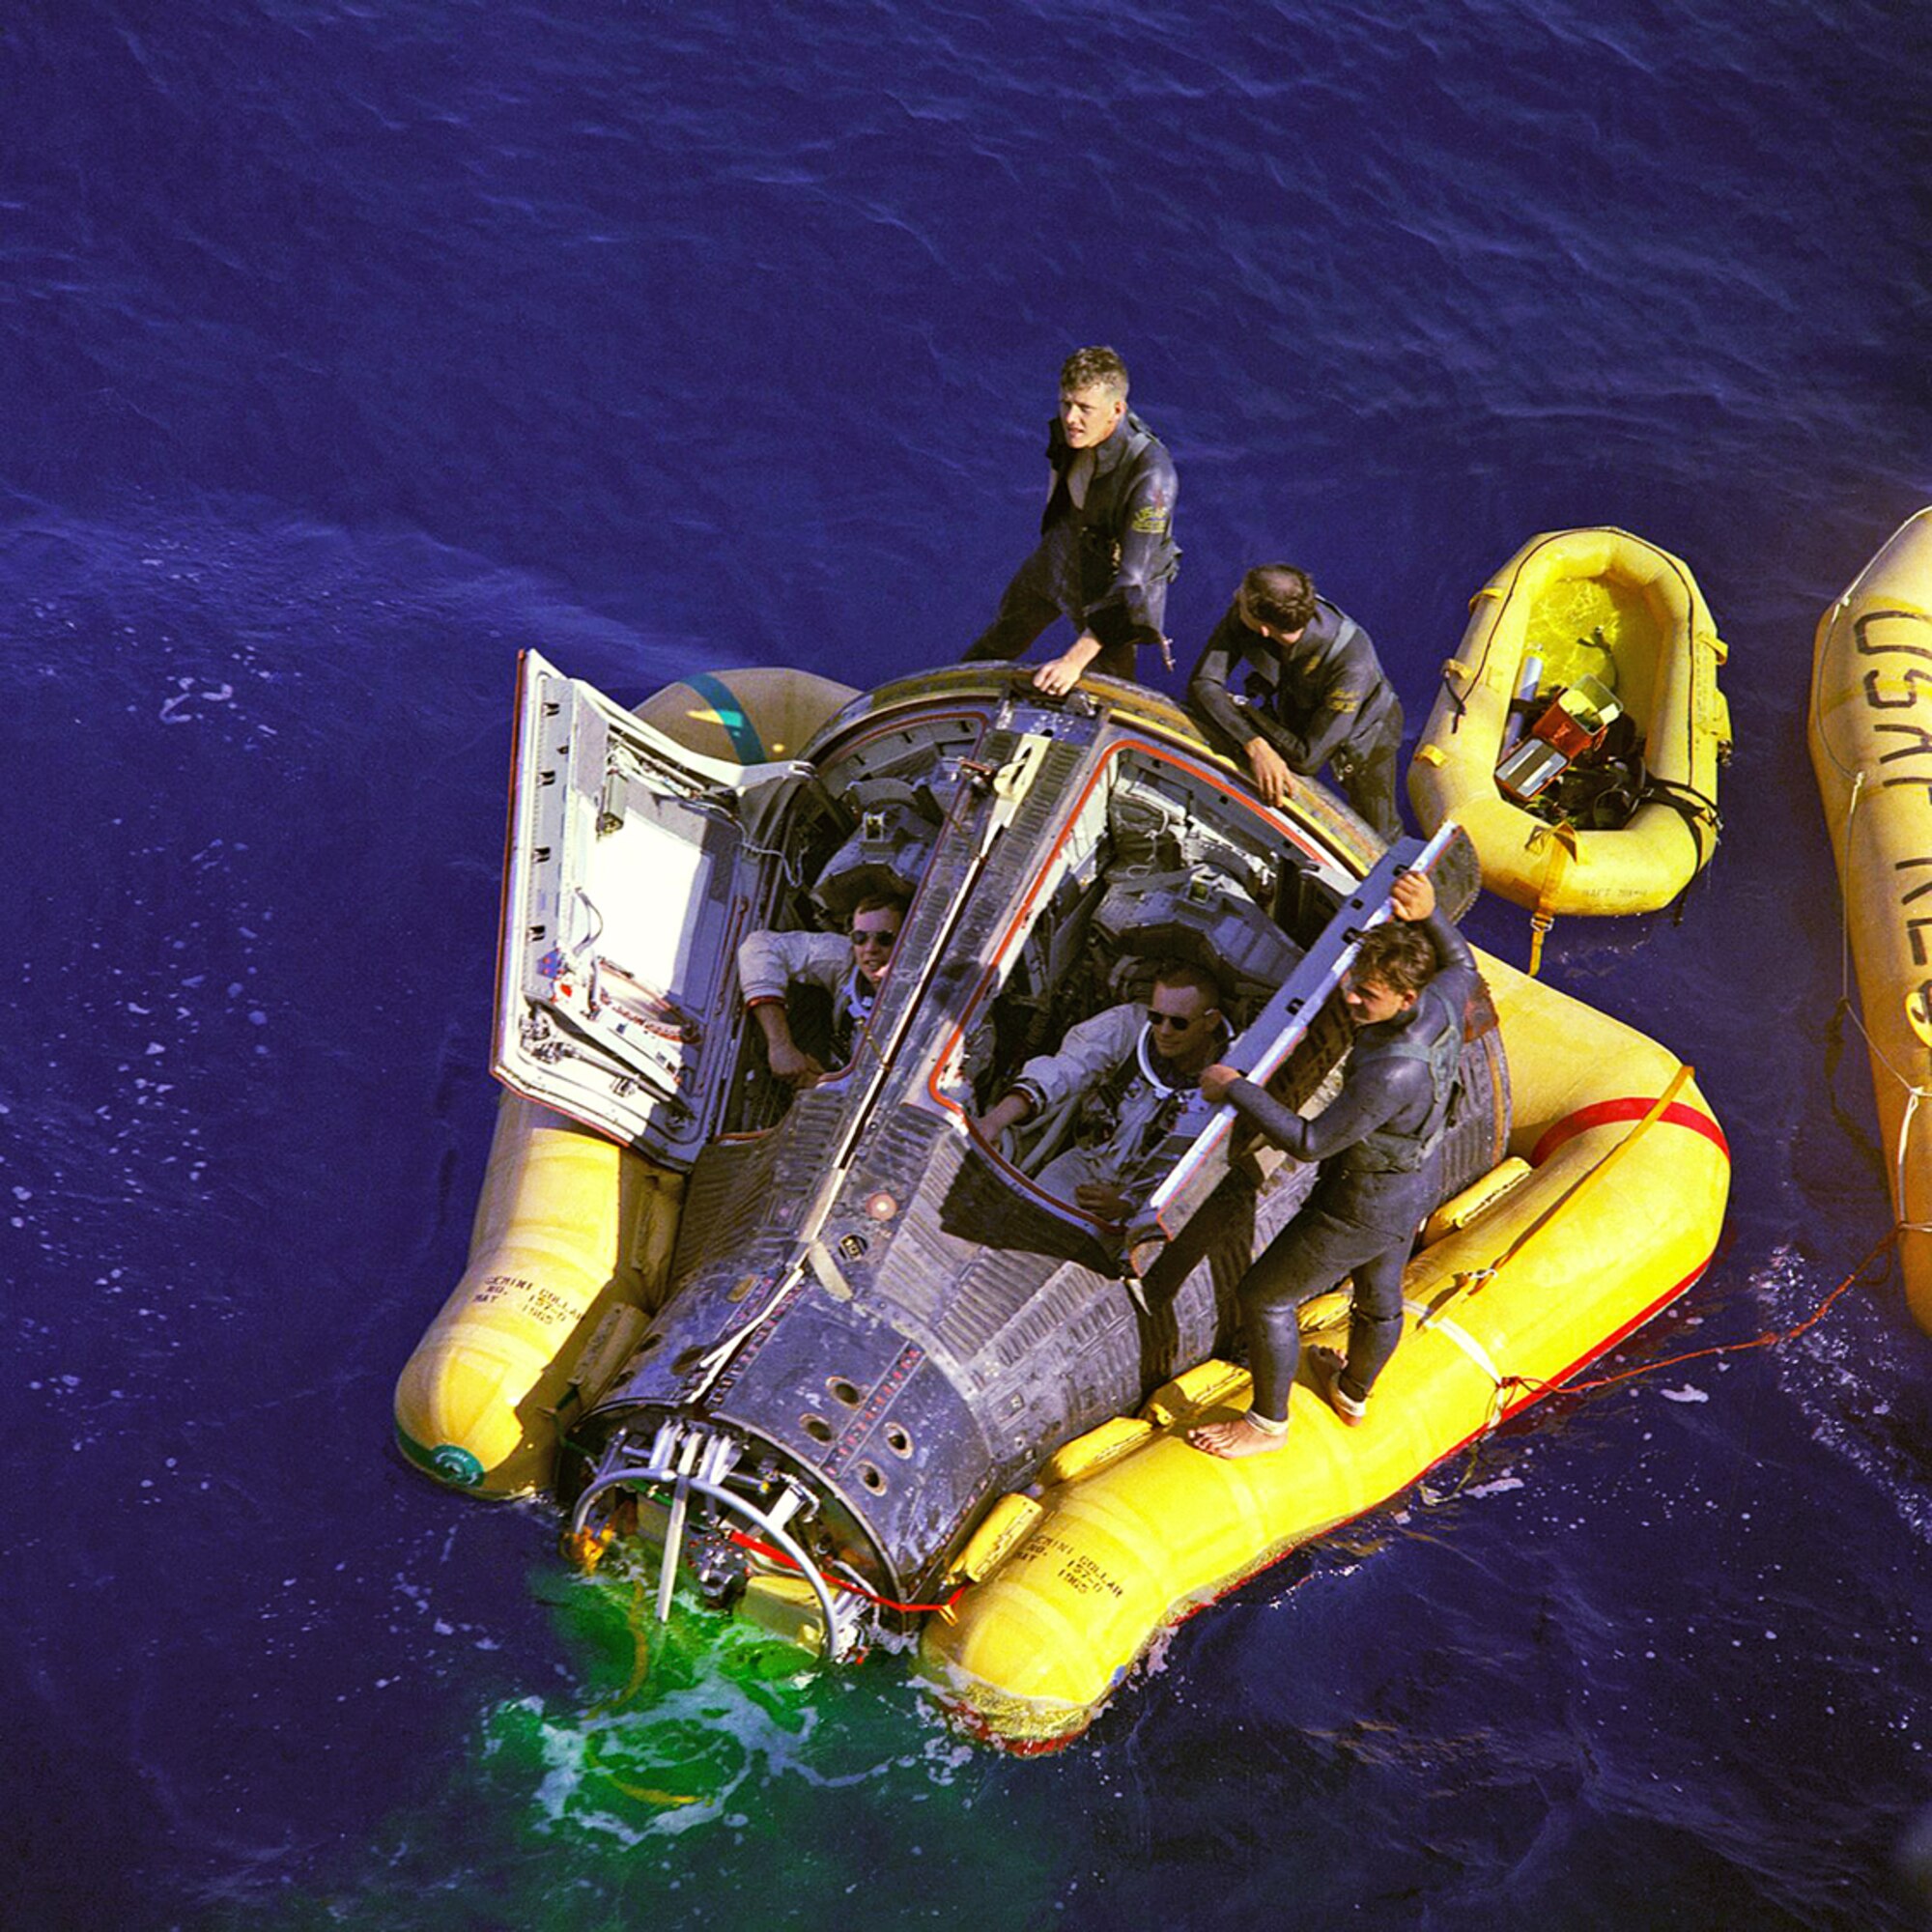 PHILIPPINE SEA, North Pacific Ocean -- Air Force pararescuemen flank Astronauts Neil A. Armstrong and David R. Scott, sitting in the Gemini 8 space craft, while awaiting the arrival of the recovery ship, the USS Leonard F. Mason after splashdown in the Pacific Ocean Mar. 16, 1966. Reservists from the 920th Rescue Wing at Patrick Air Force Base, Fla. provide first-response contingency medical and rescue support for all NASA shuttle launches. With the advent of the NASA's new capsule-based, manned-spaceflight program, Constellation, Air Force pararescuemen will once again greet astronauts on the high seas following splashdown. (NASA courtesy photo)